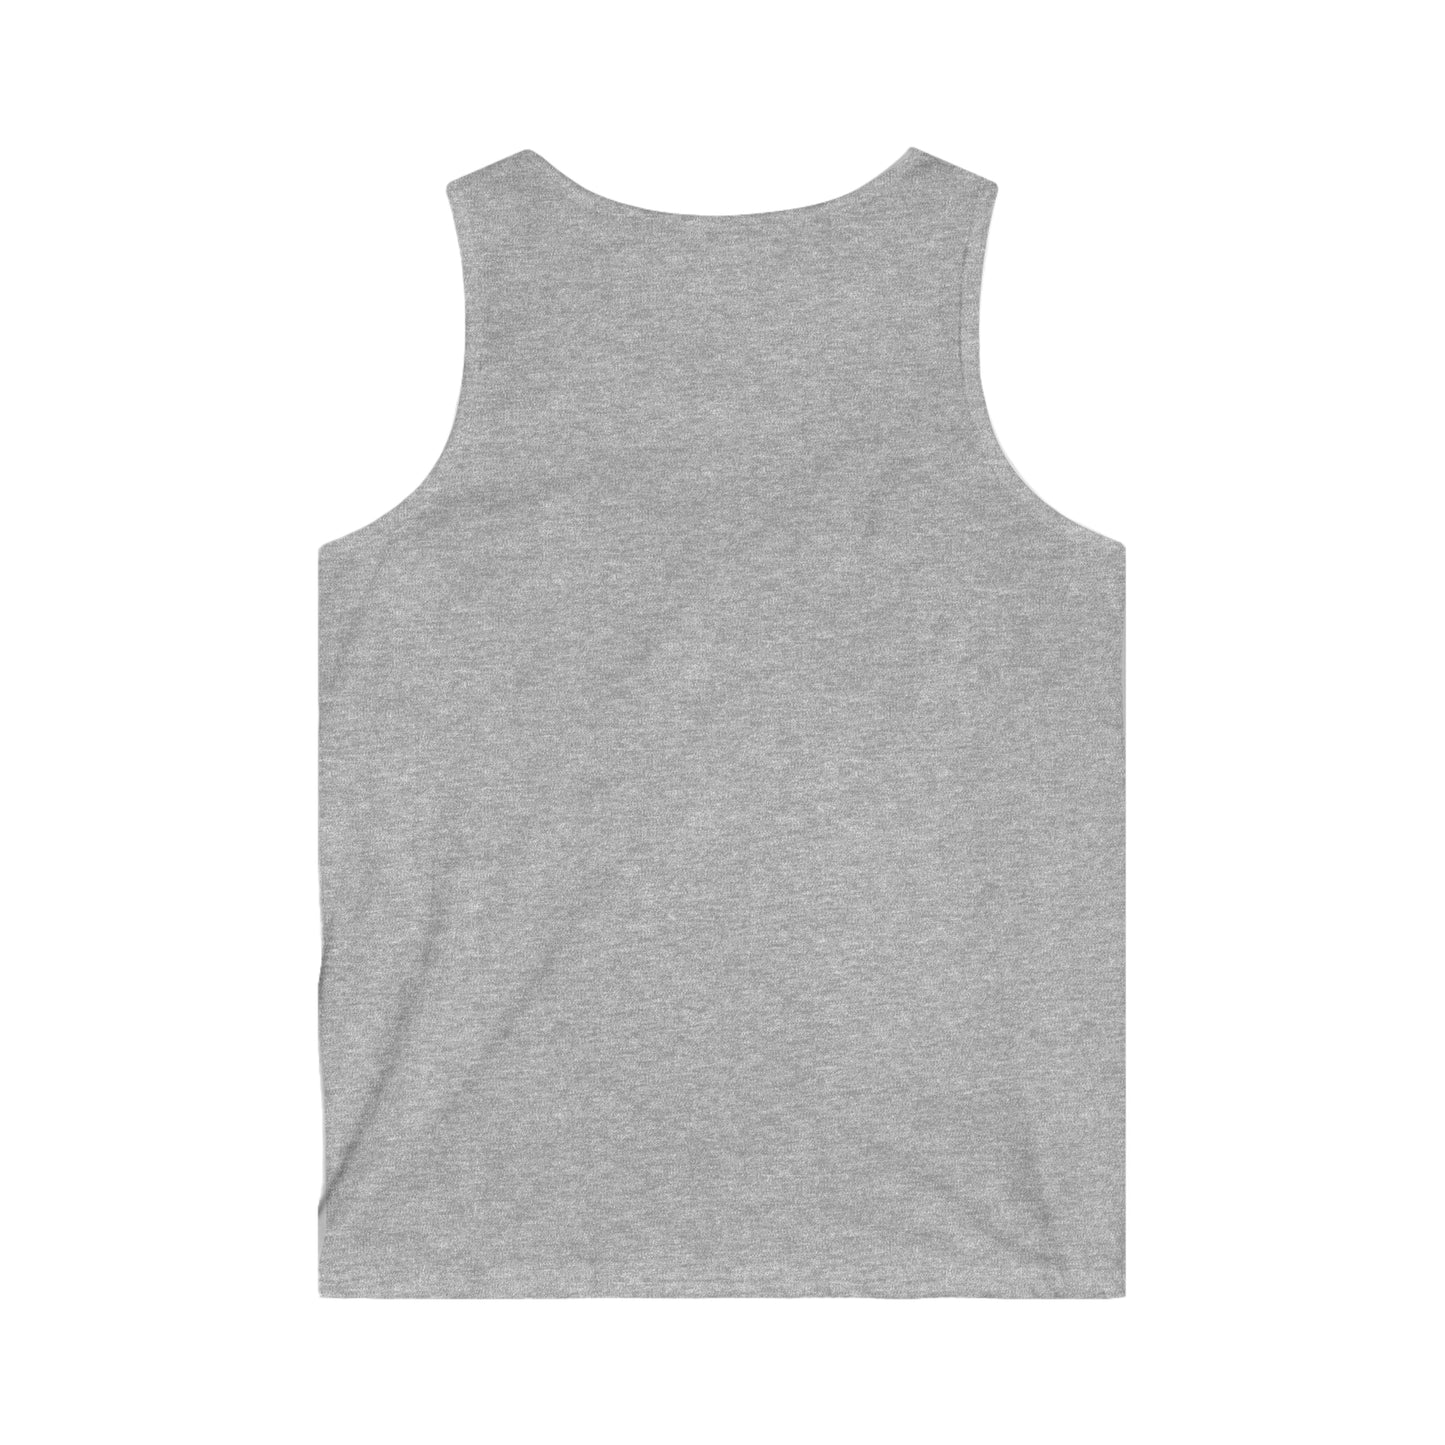 Don't Dream It, Be It Men's Softstyle Tank Top